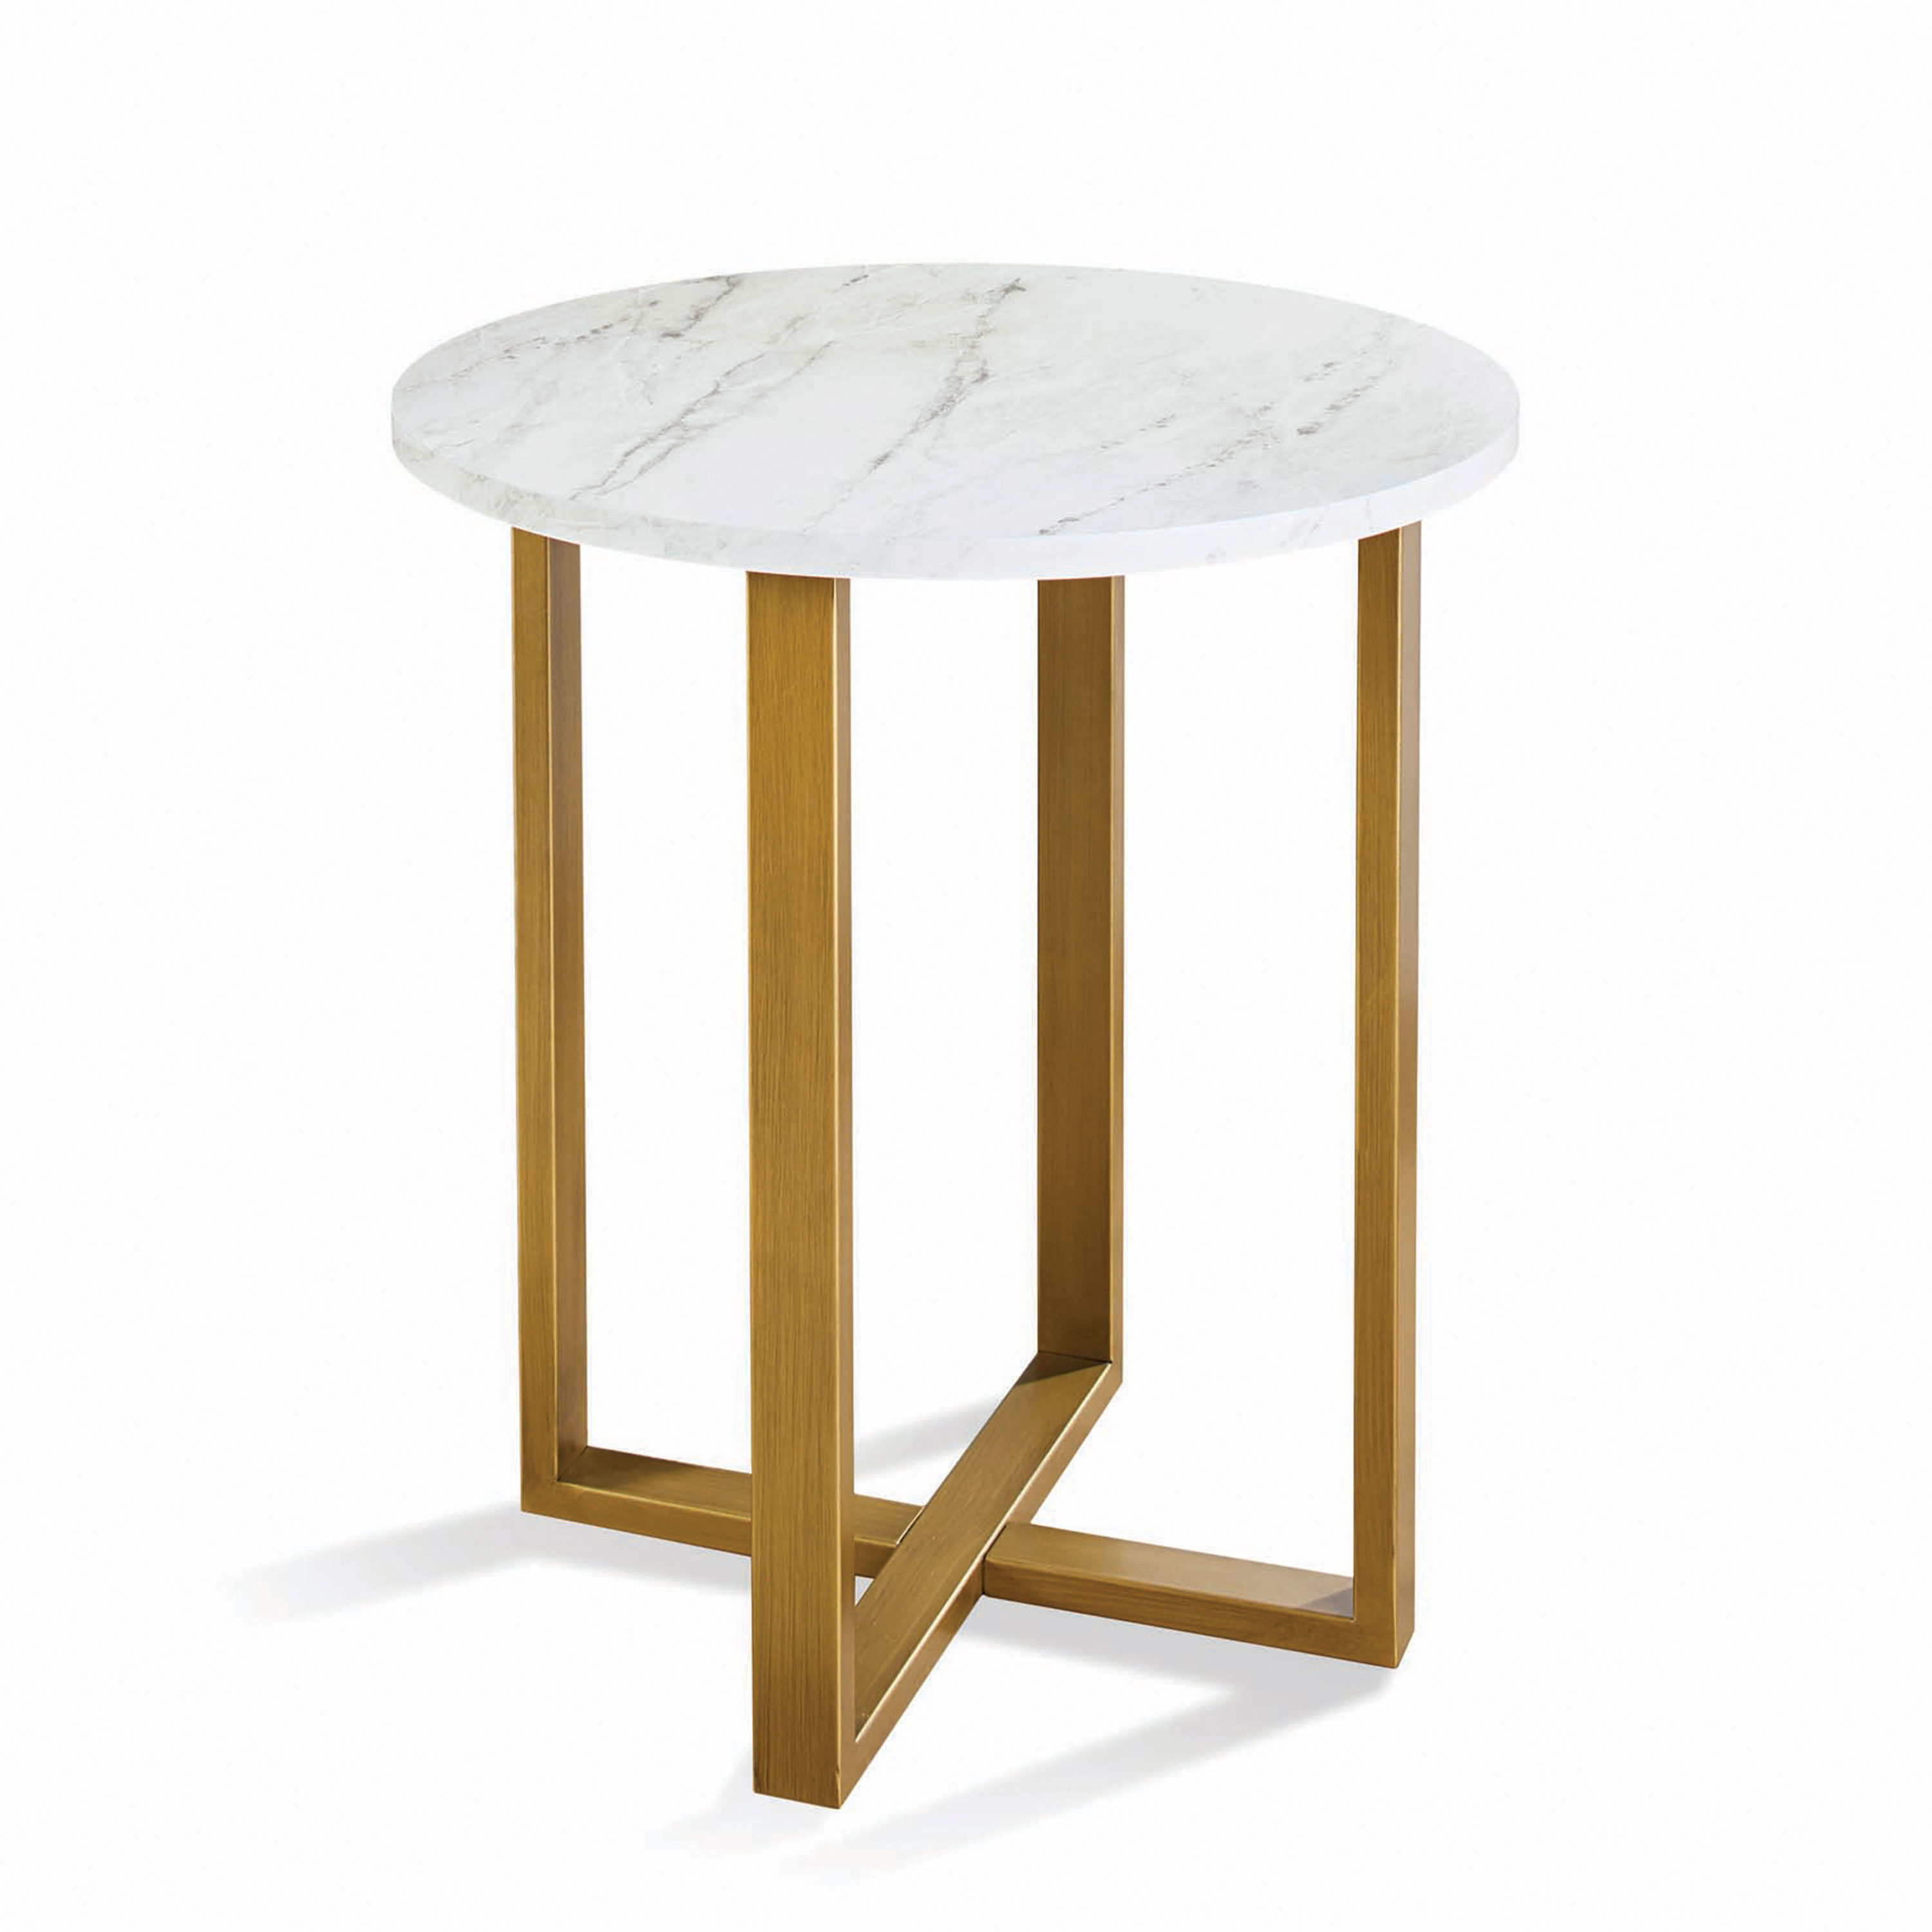 Better Homes & Gardens Lana Marble Side Table - image 2 of 5